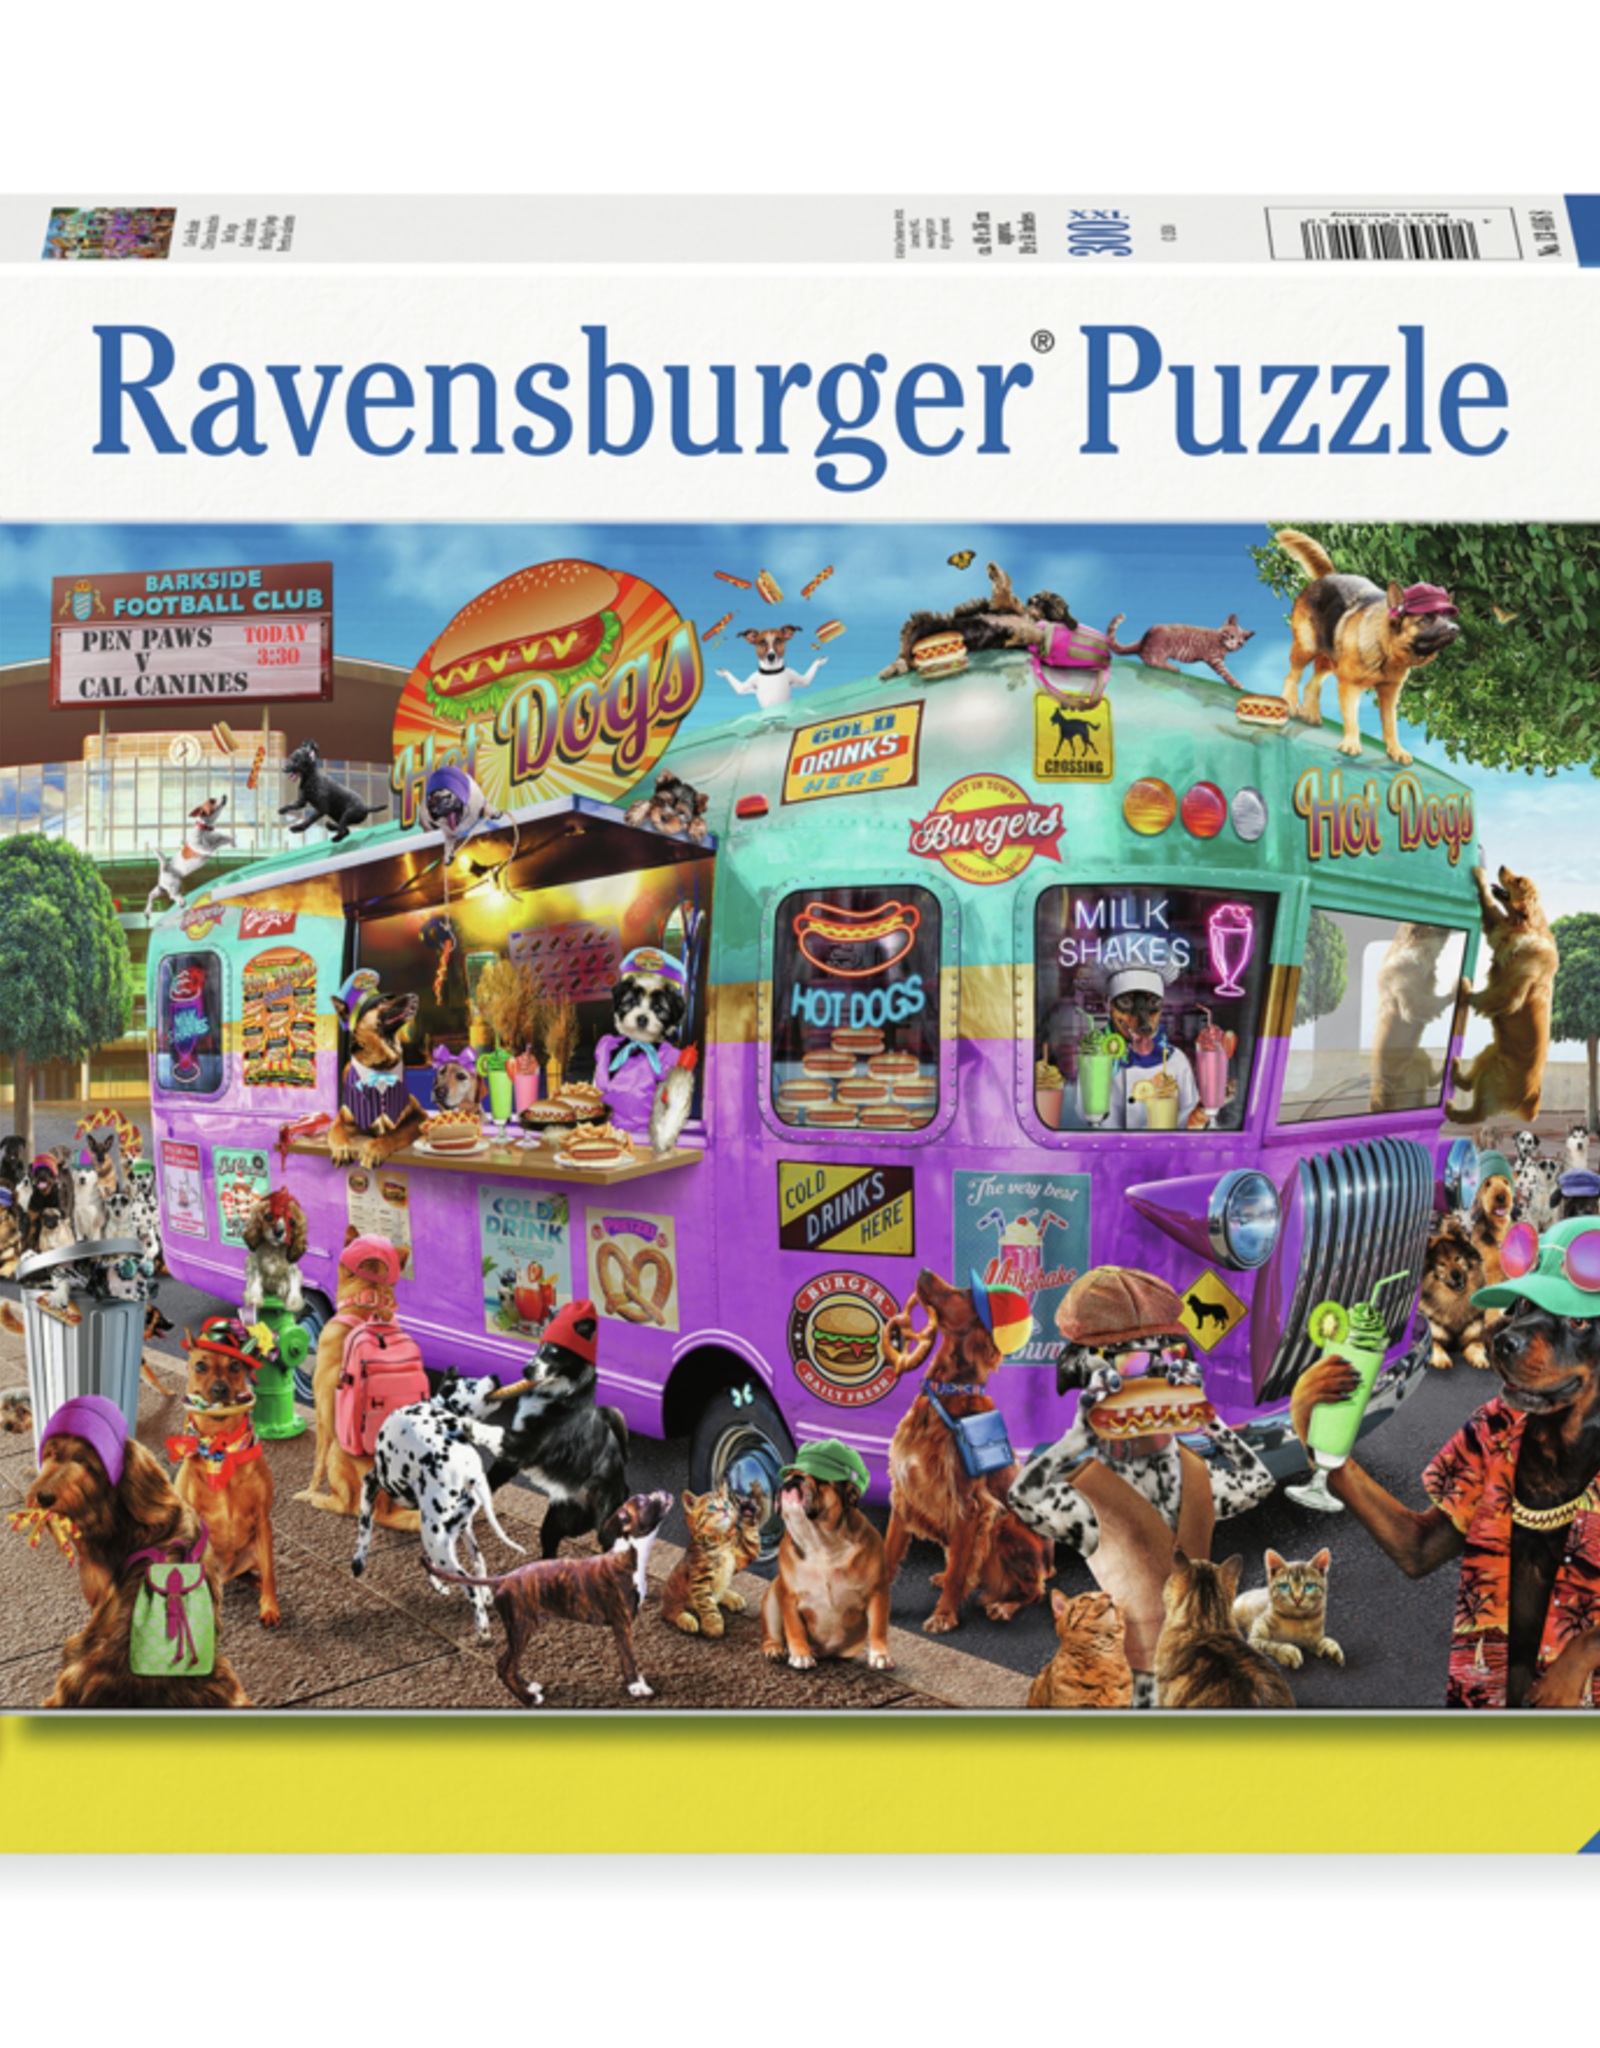 Ravensburger Hot Diggity Dogs 300 pc Puzzle